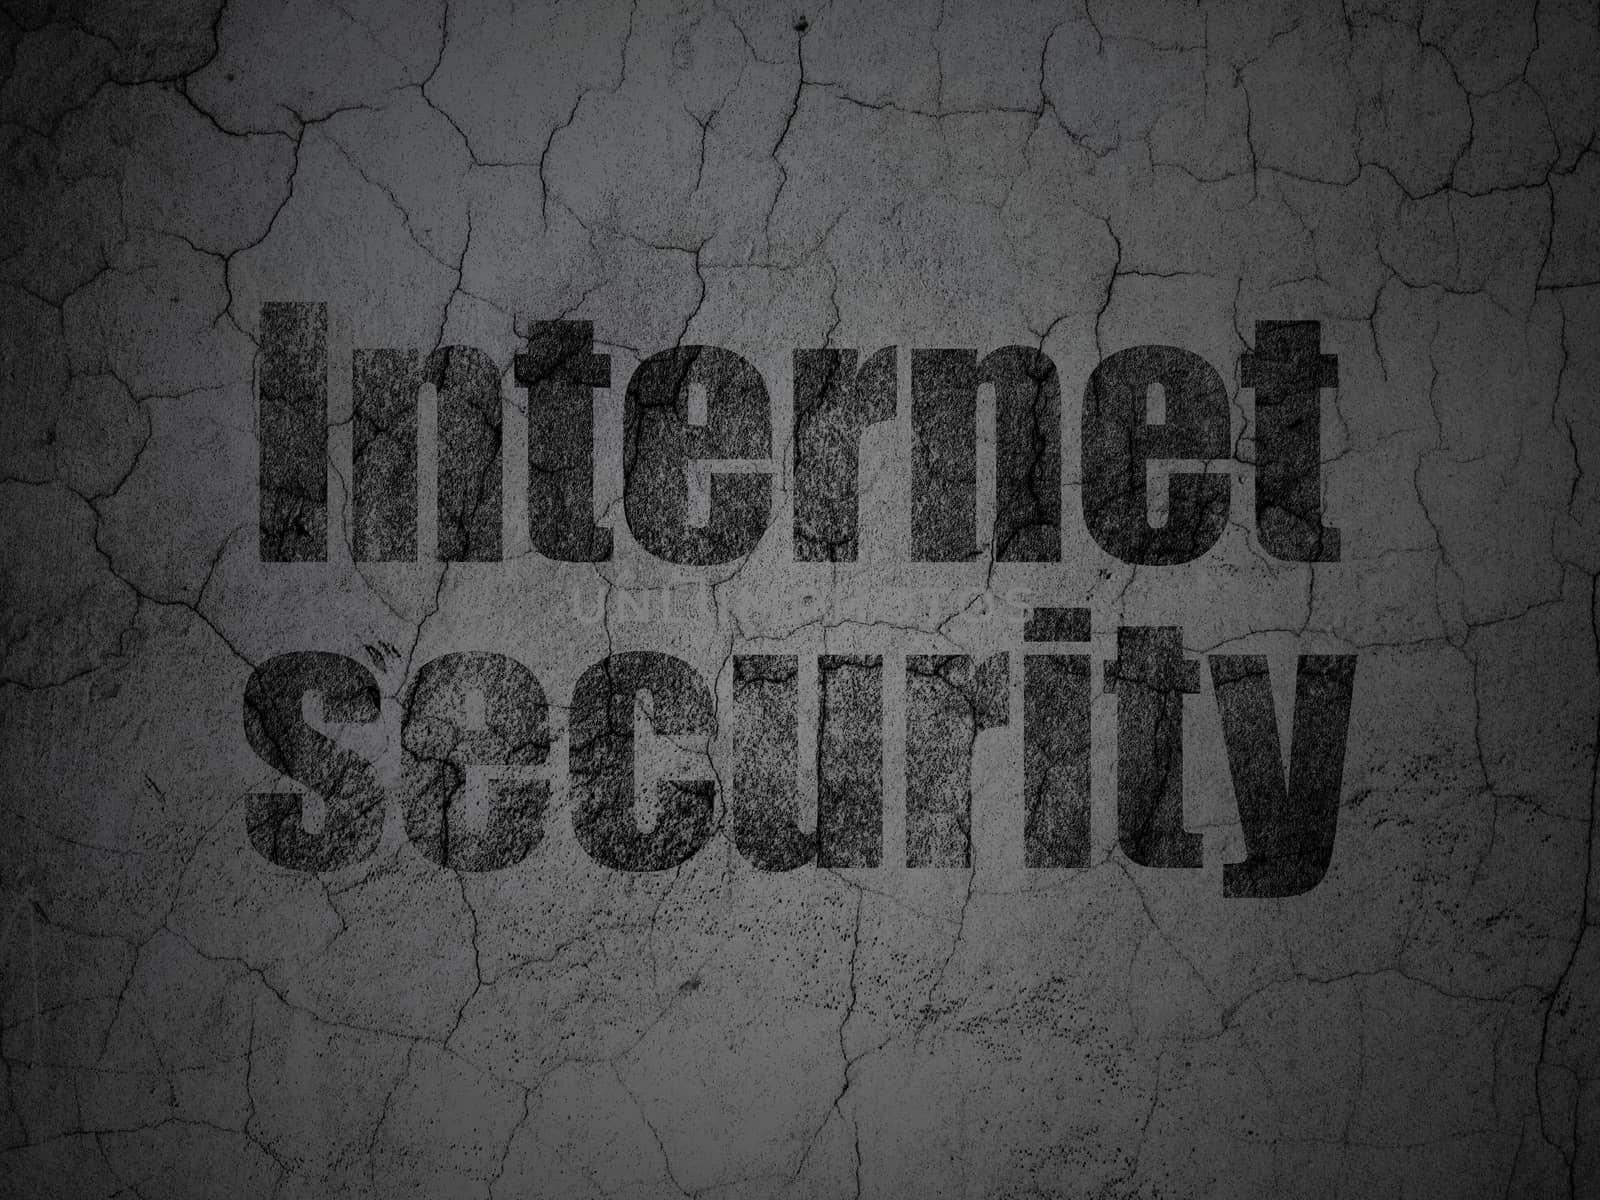 Safety concept: Black Internet Security on grunge textured concrete wall background